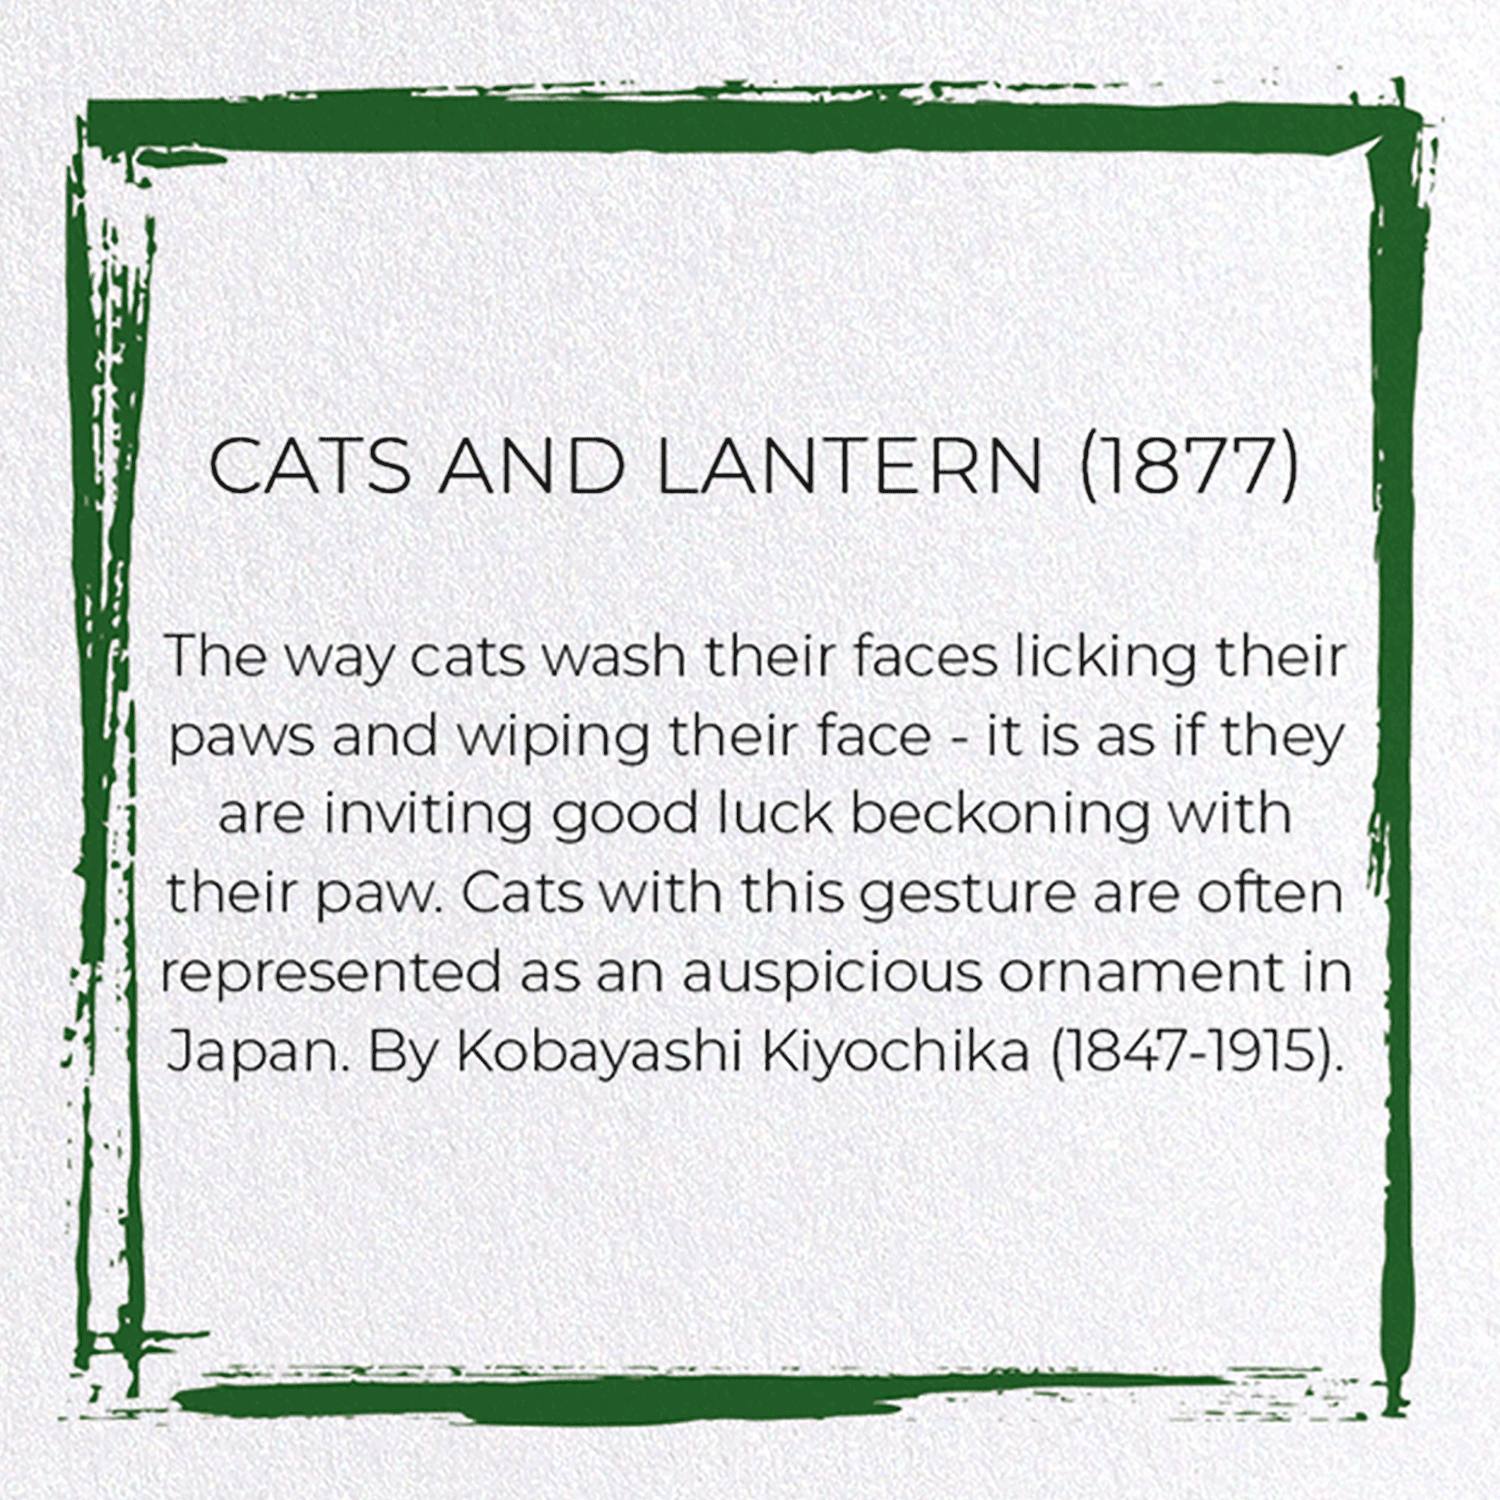 CATS AND LANTERN (1877)